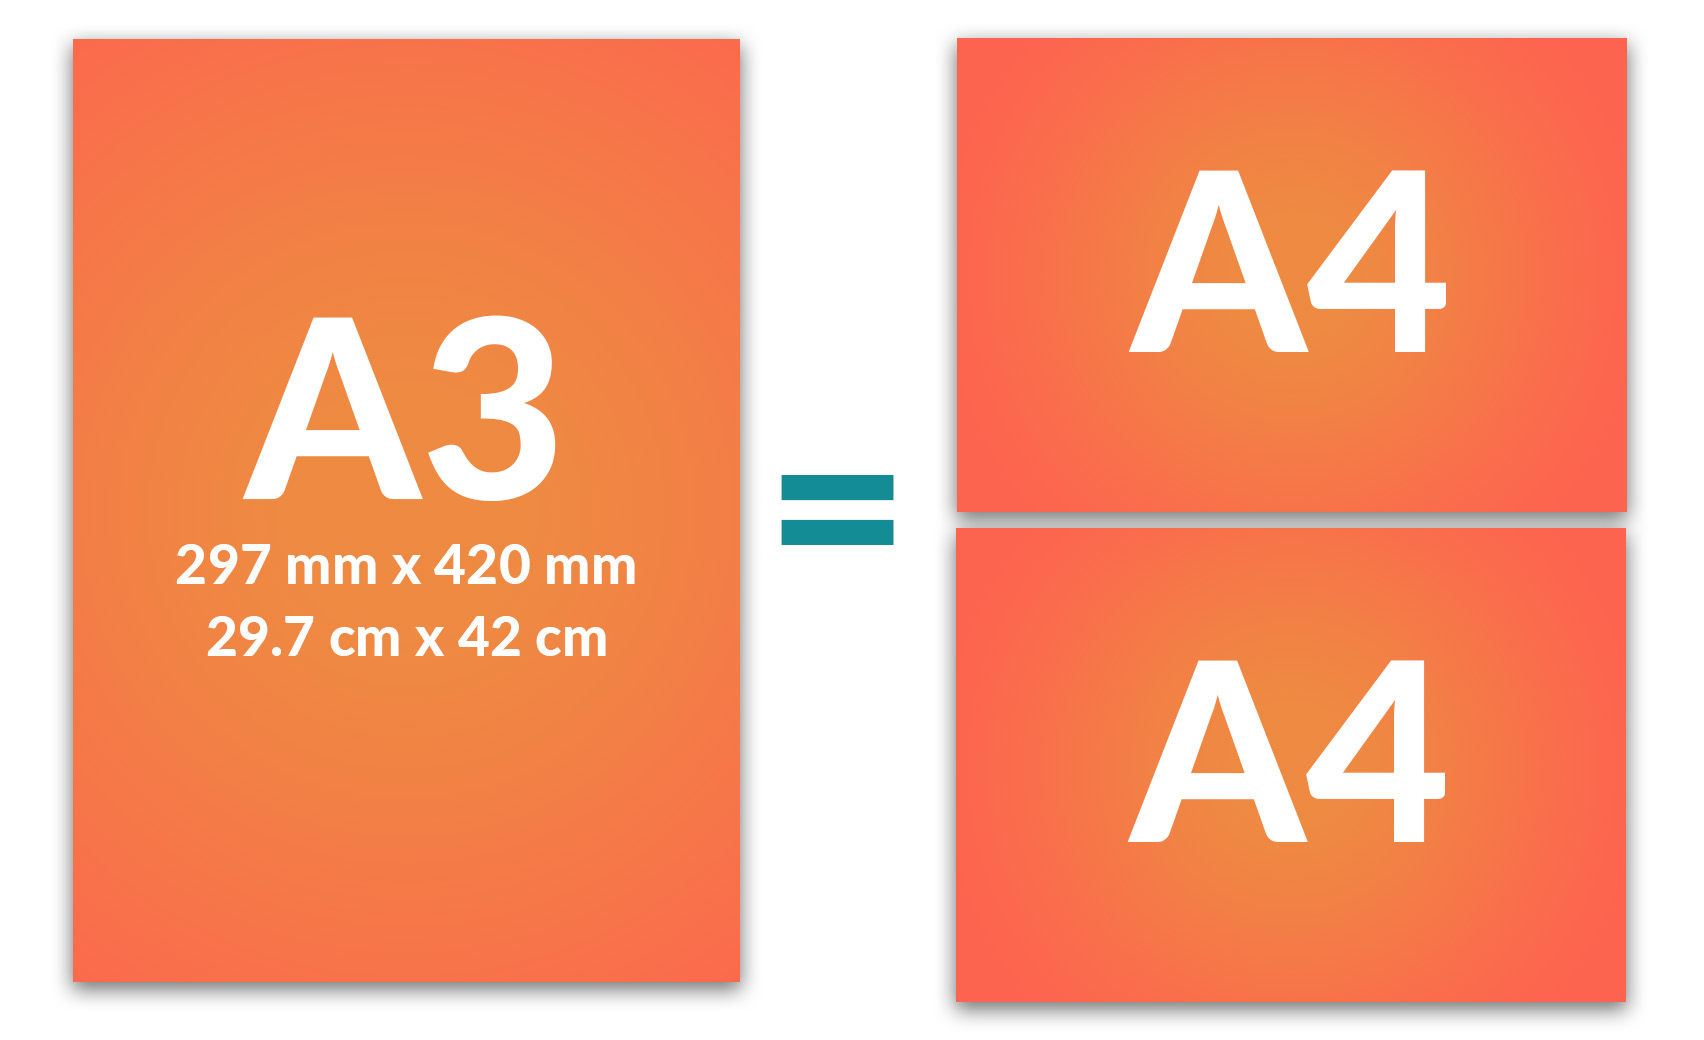 A4 size in inches. Read here what the A4 size is in in. (inches).